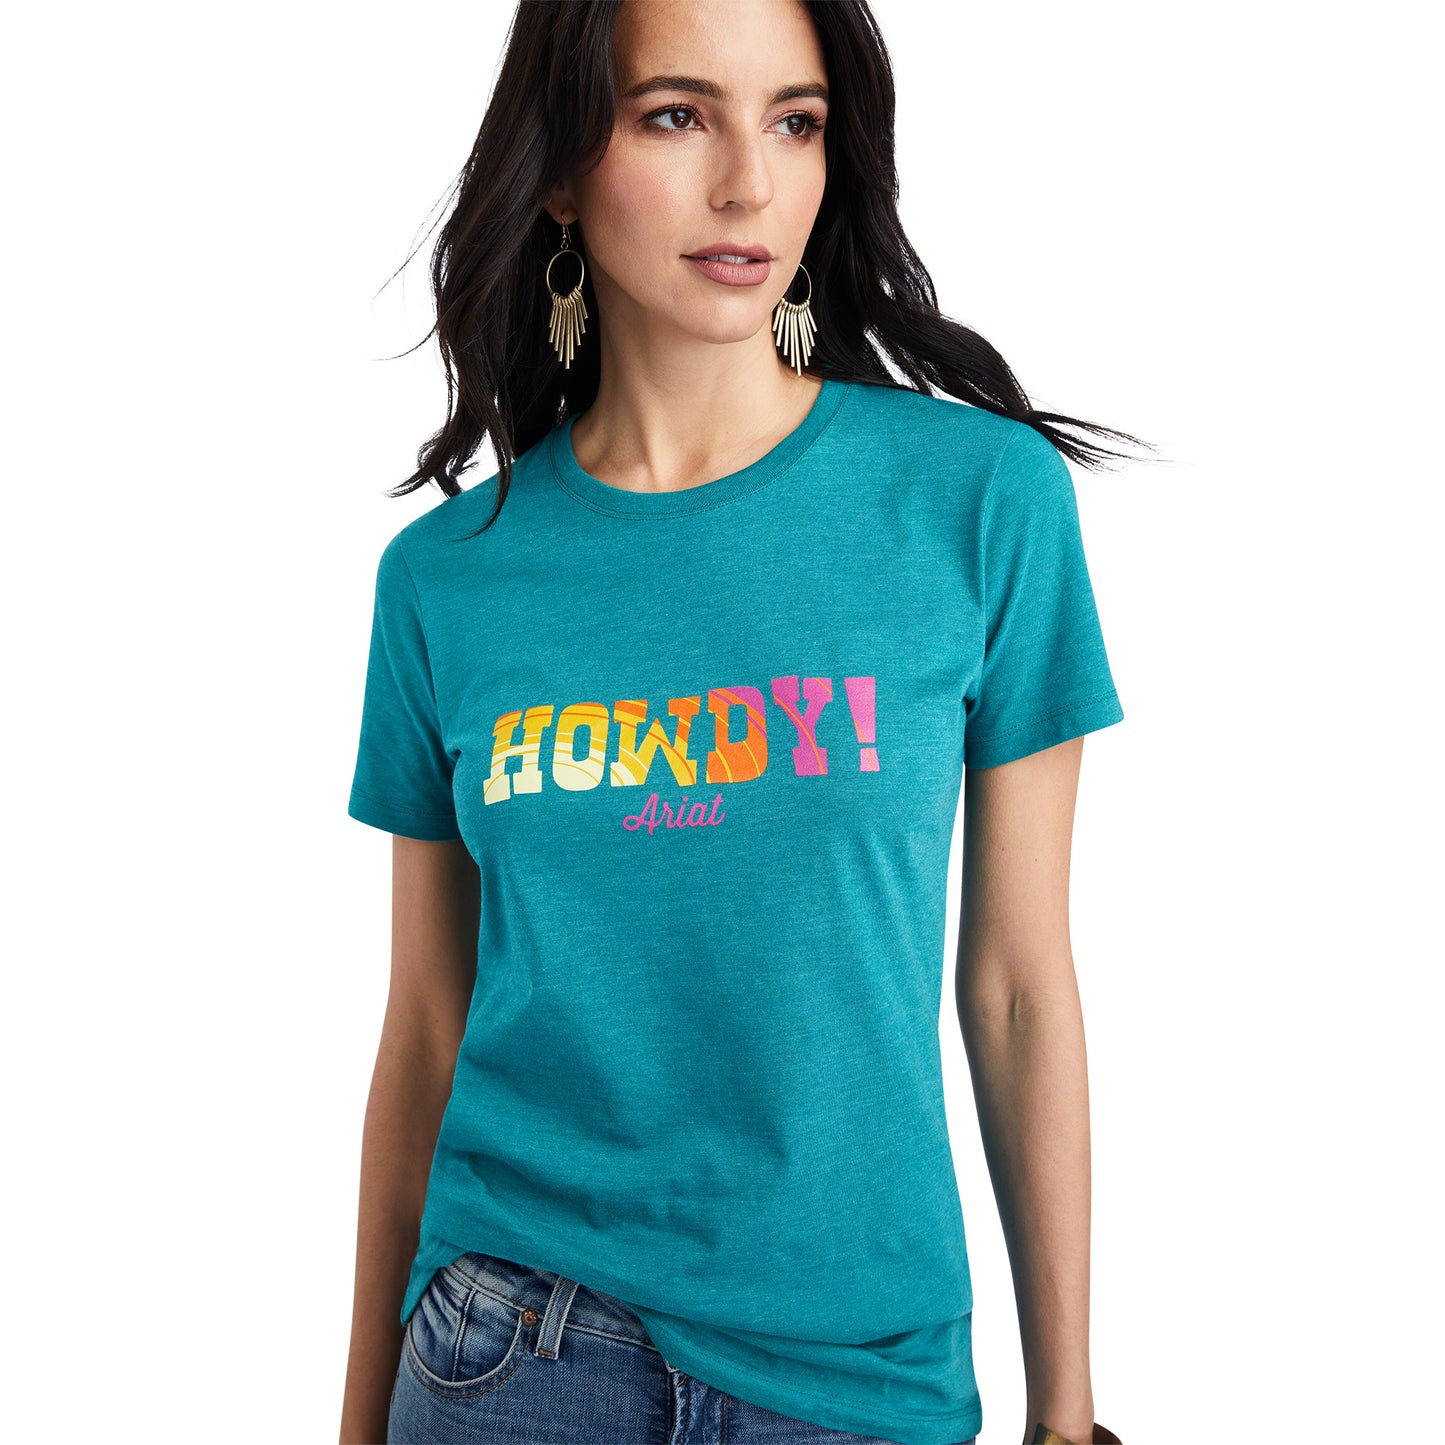 Ariat® Ladies Howdy Graphic Teal Green Heather T-shirt 10042726